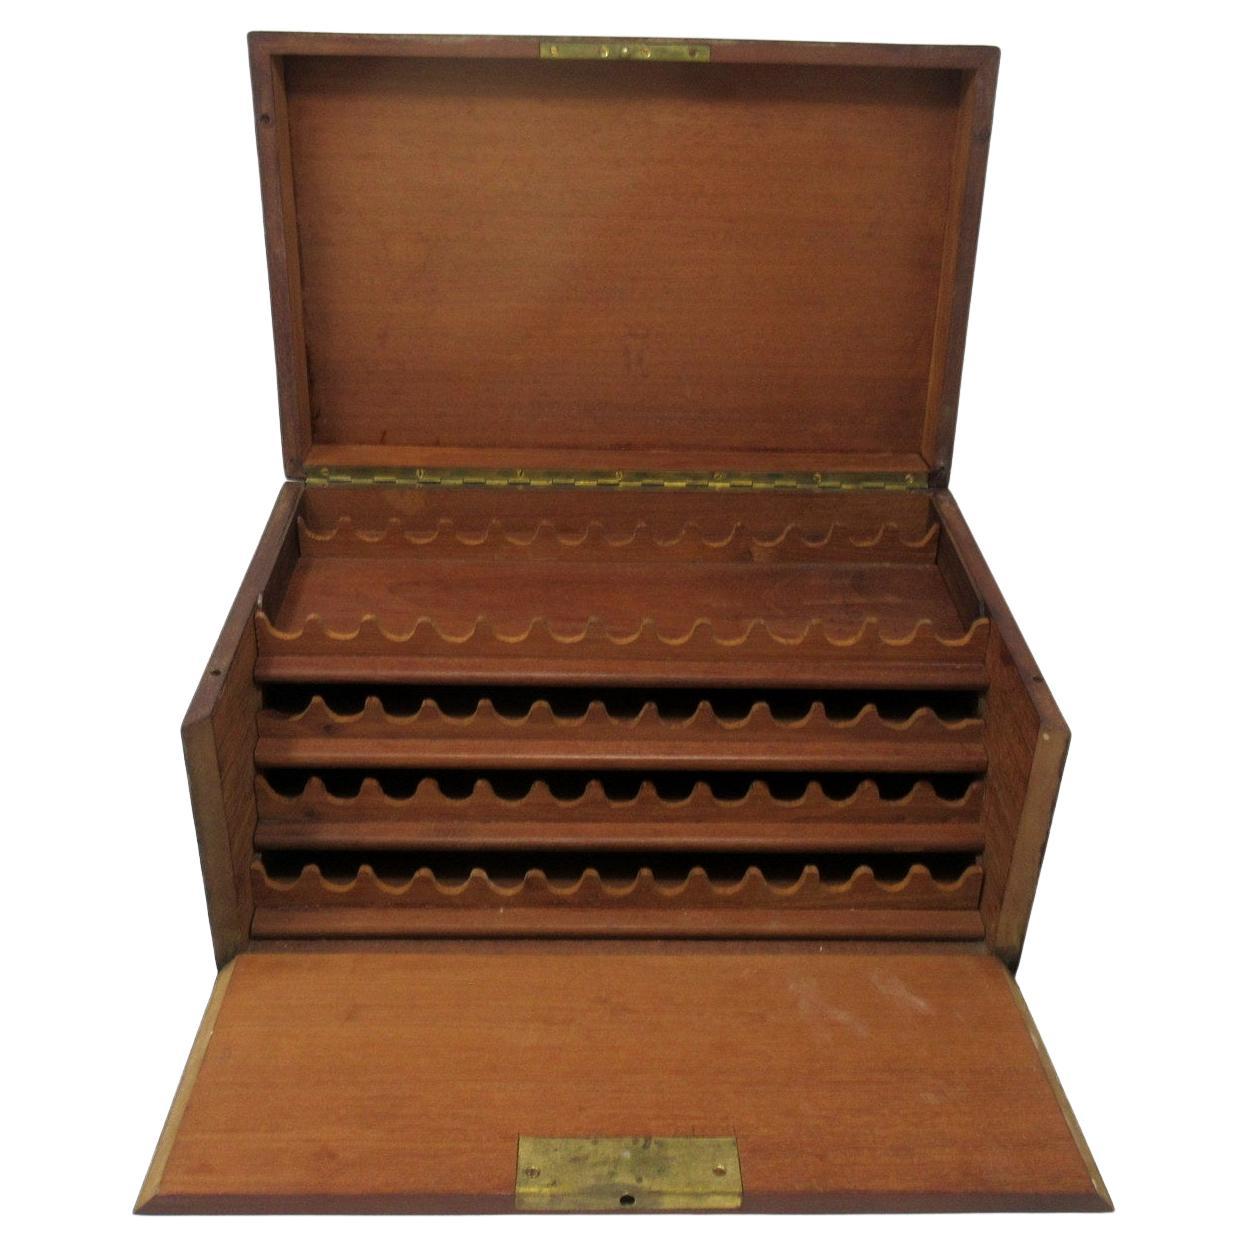 An exceptionally fine example of a Gentlemans Tunbridge Ware Parquetry inlaid Cigar or Cigarette Casket of generous size. Last half of the Nineteenth Century, of English origin. 

The hinged lid with superb diamond pattern inlay decoration within